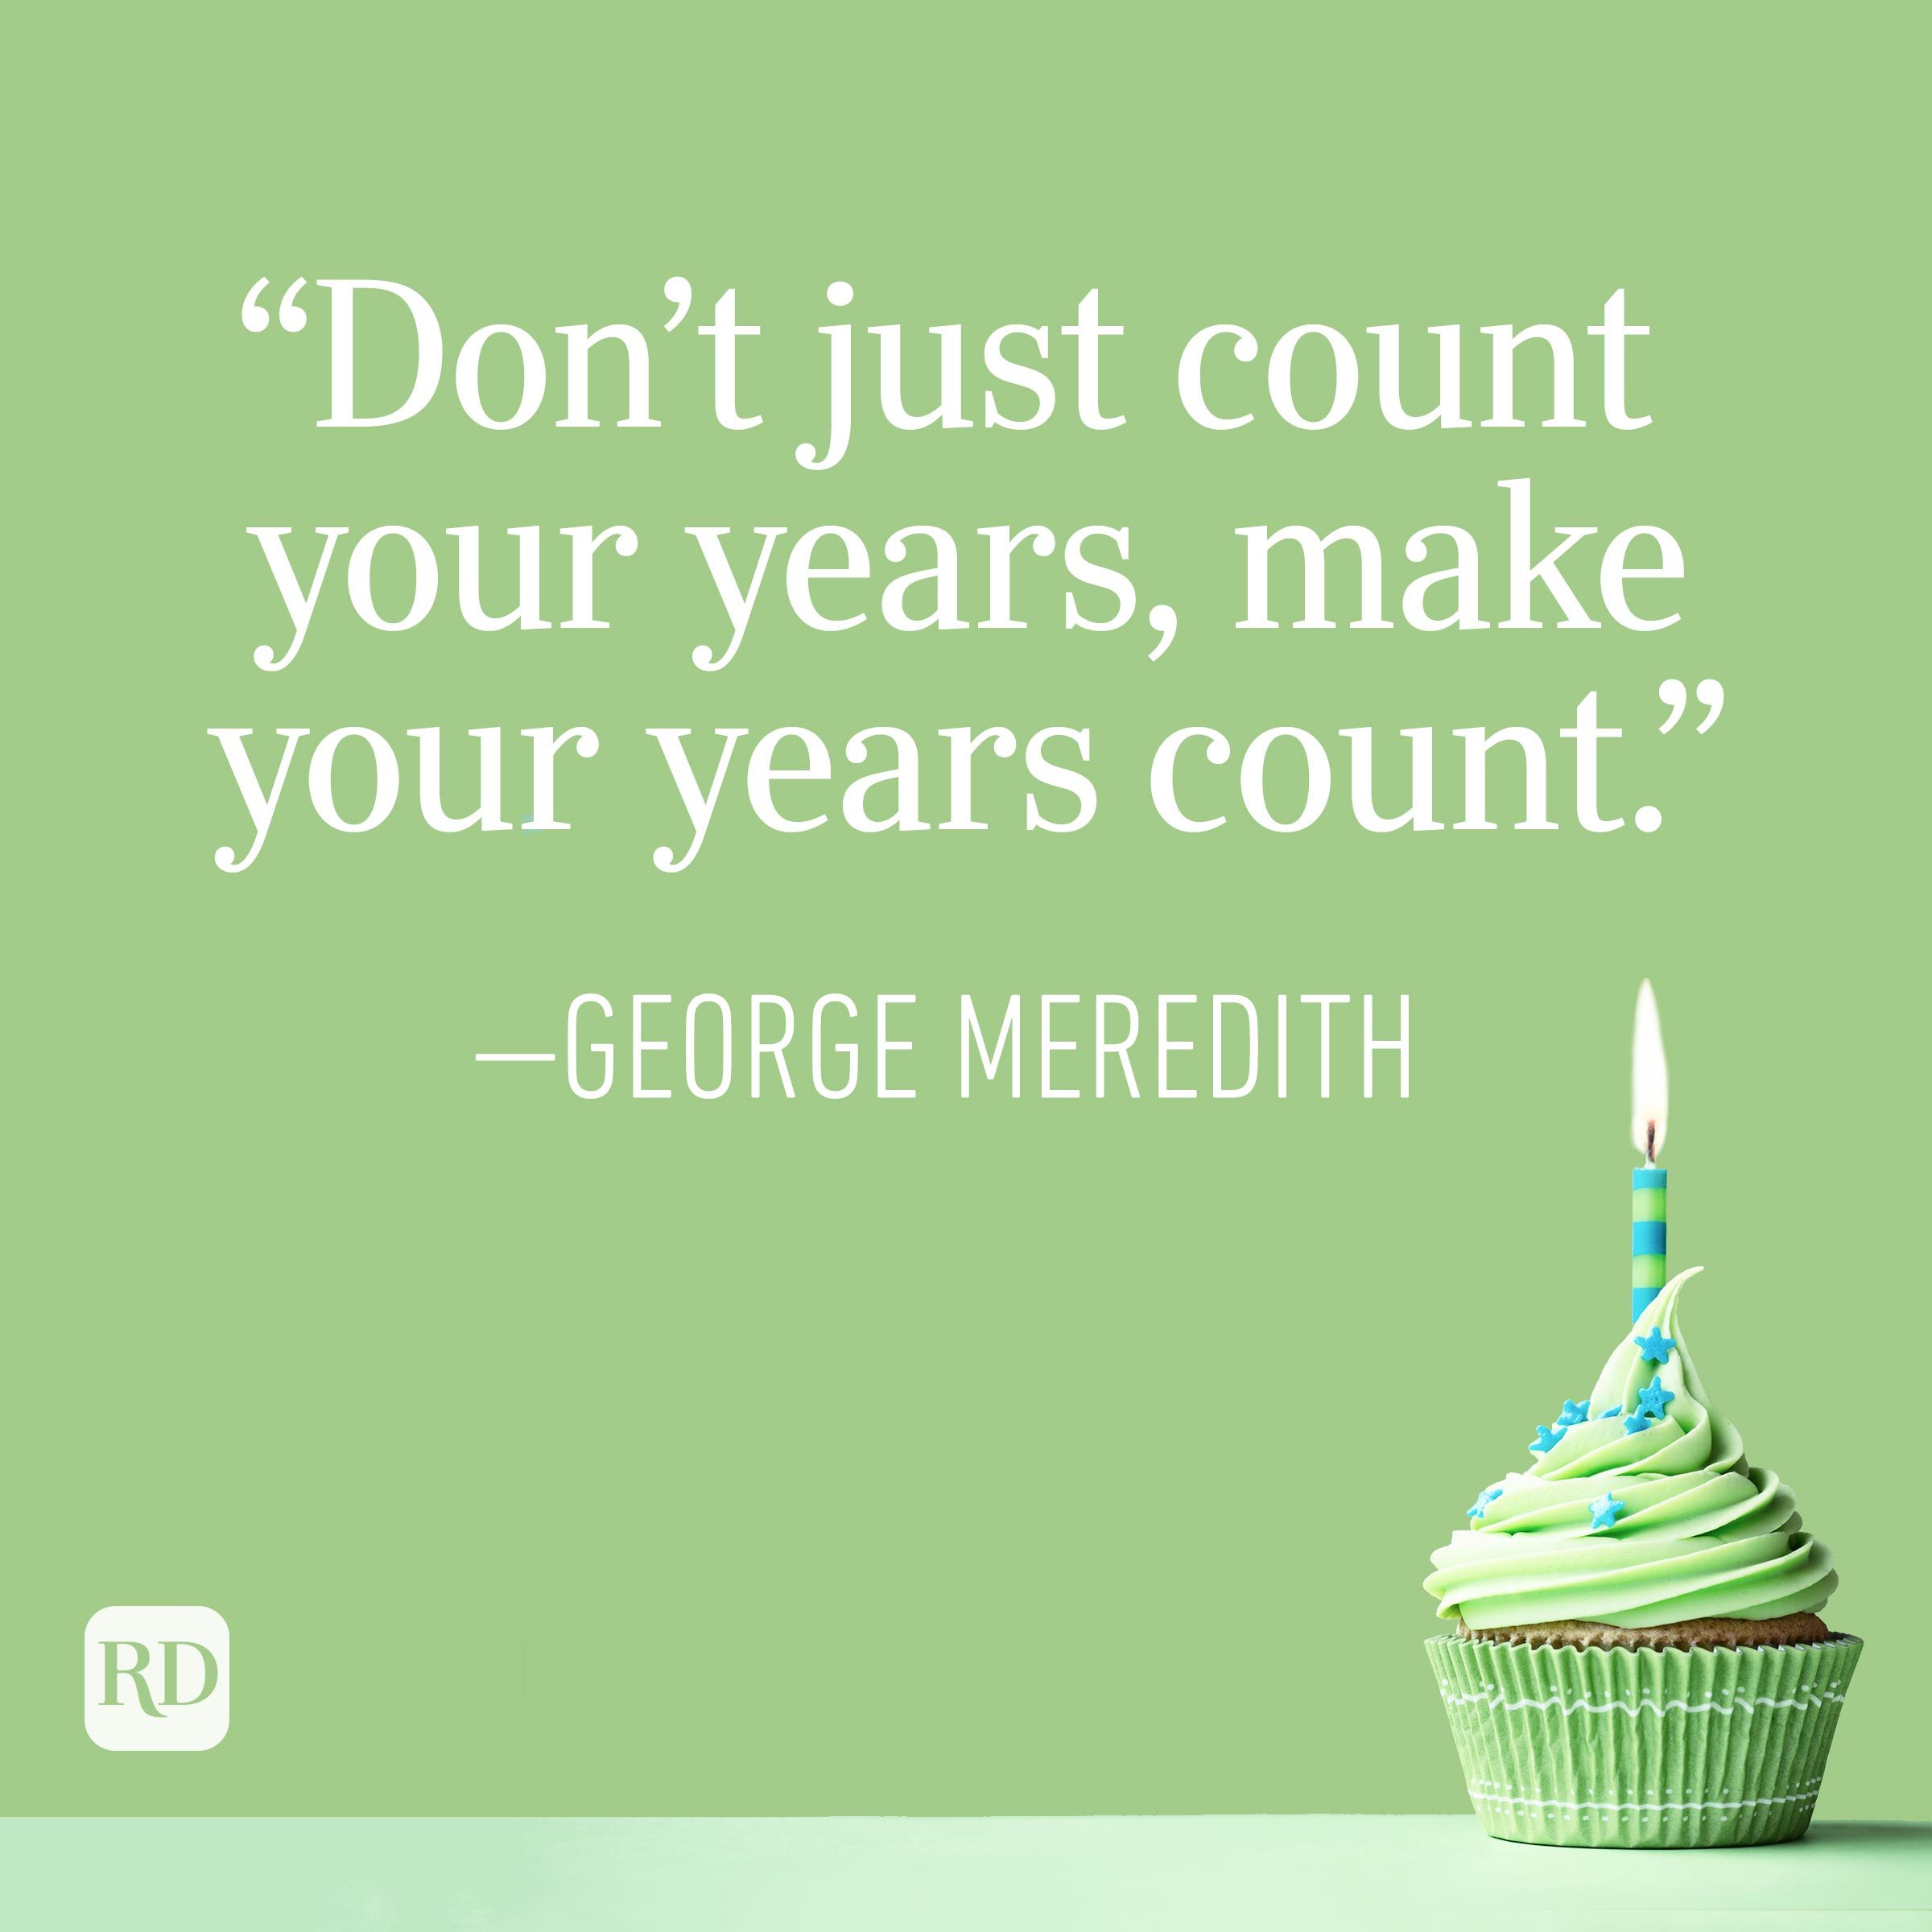 "Don't just count your years, make your years count." —George Meredith